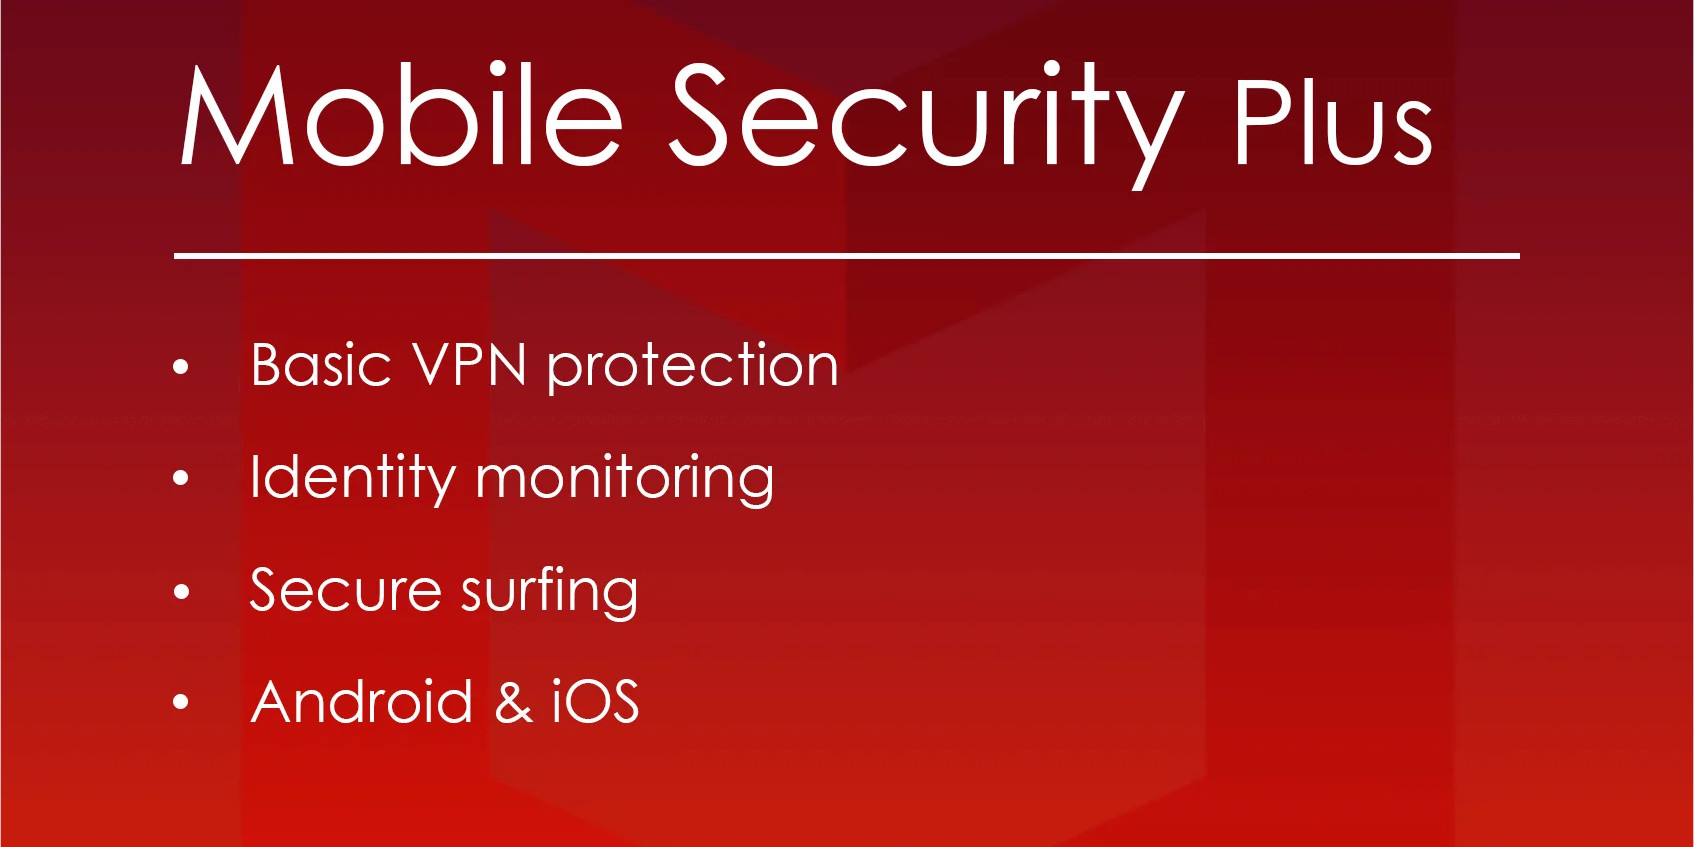 McAfee Mobile Security Plus VPN Key (1 Year / Unlimited Devices) [$ 6.75]